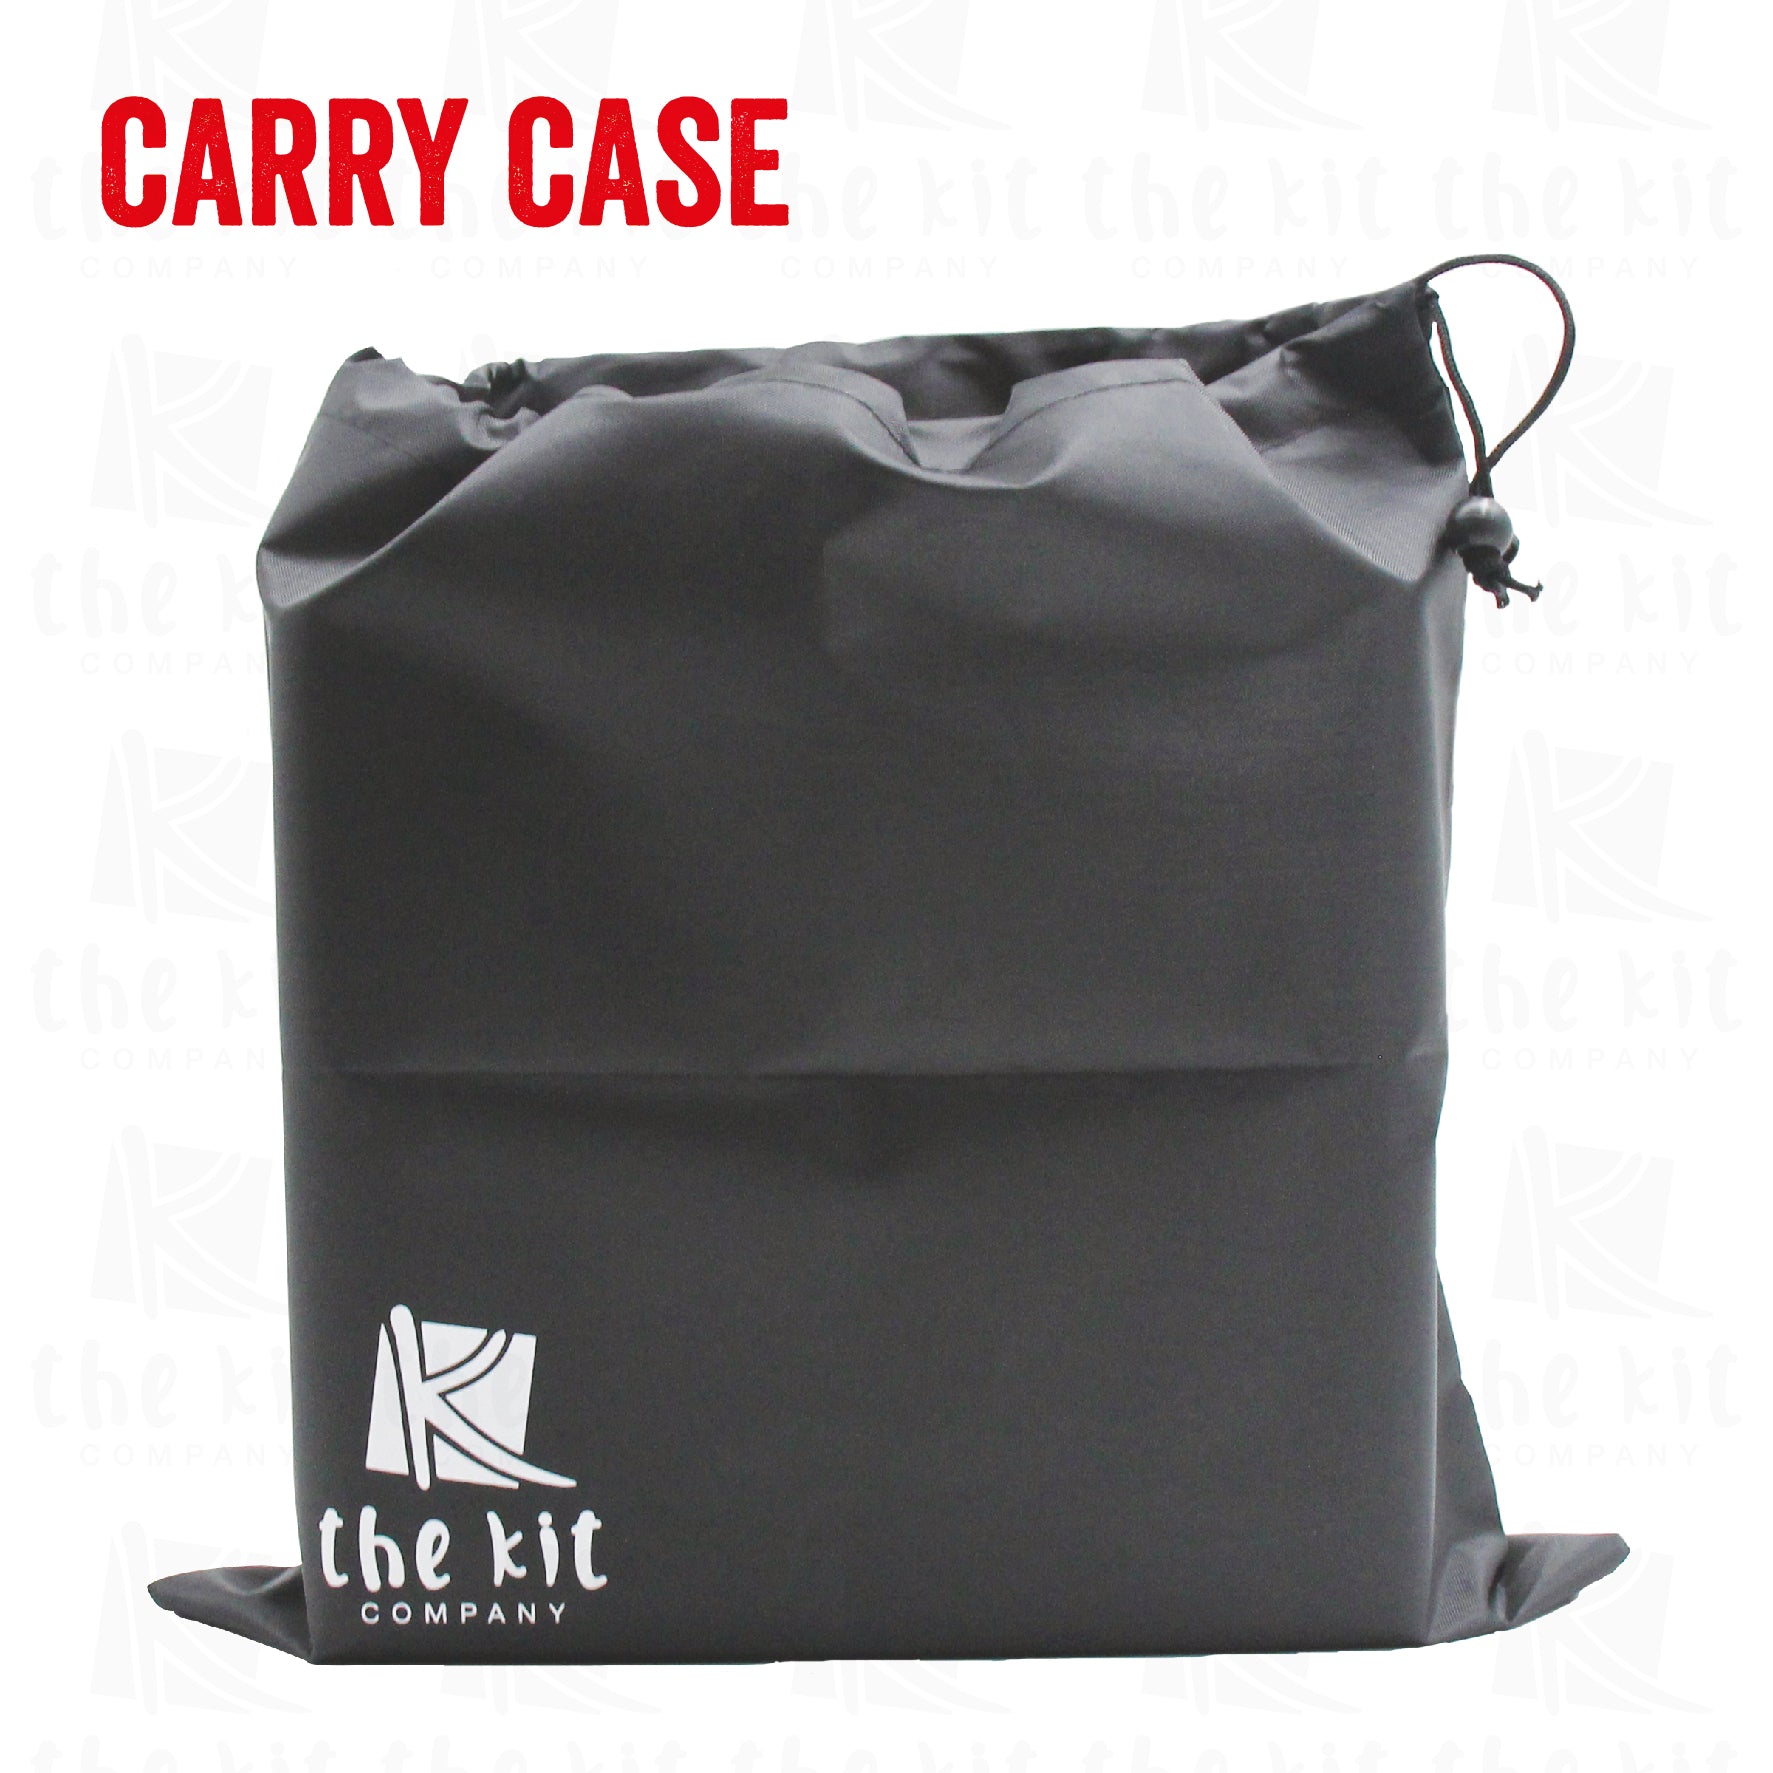 Carry case